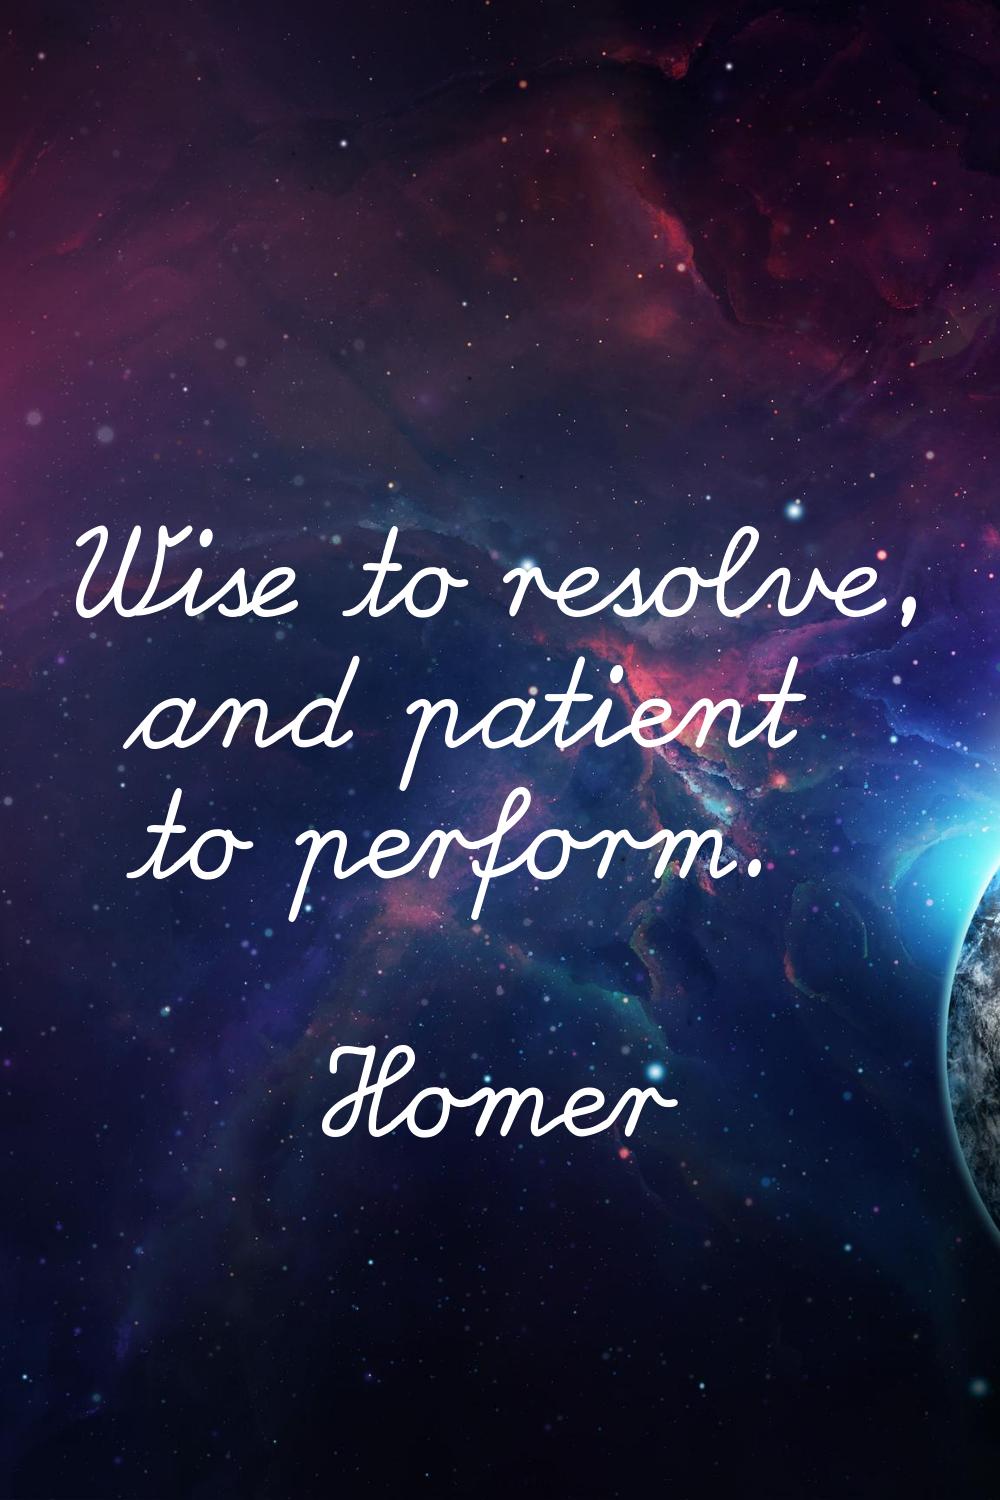 Wise to resolve, and patient to perform.